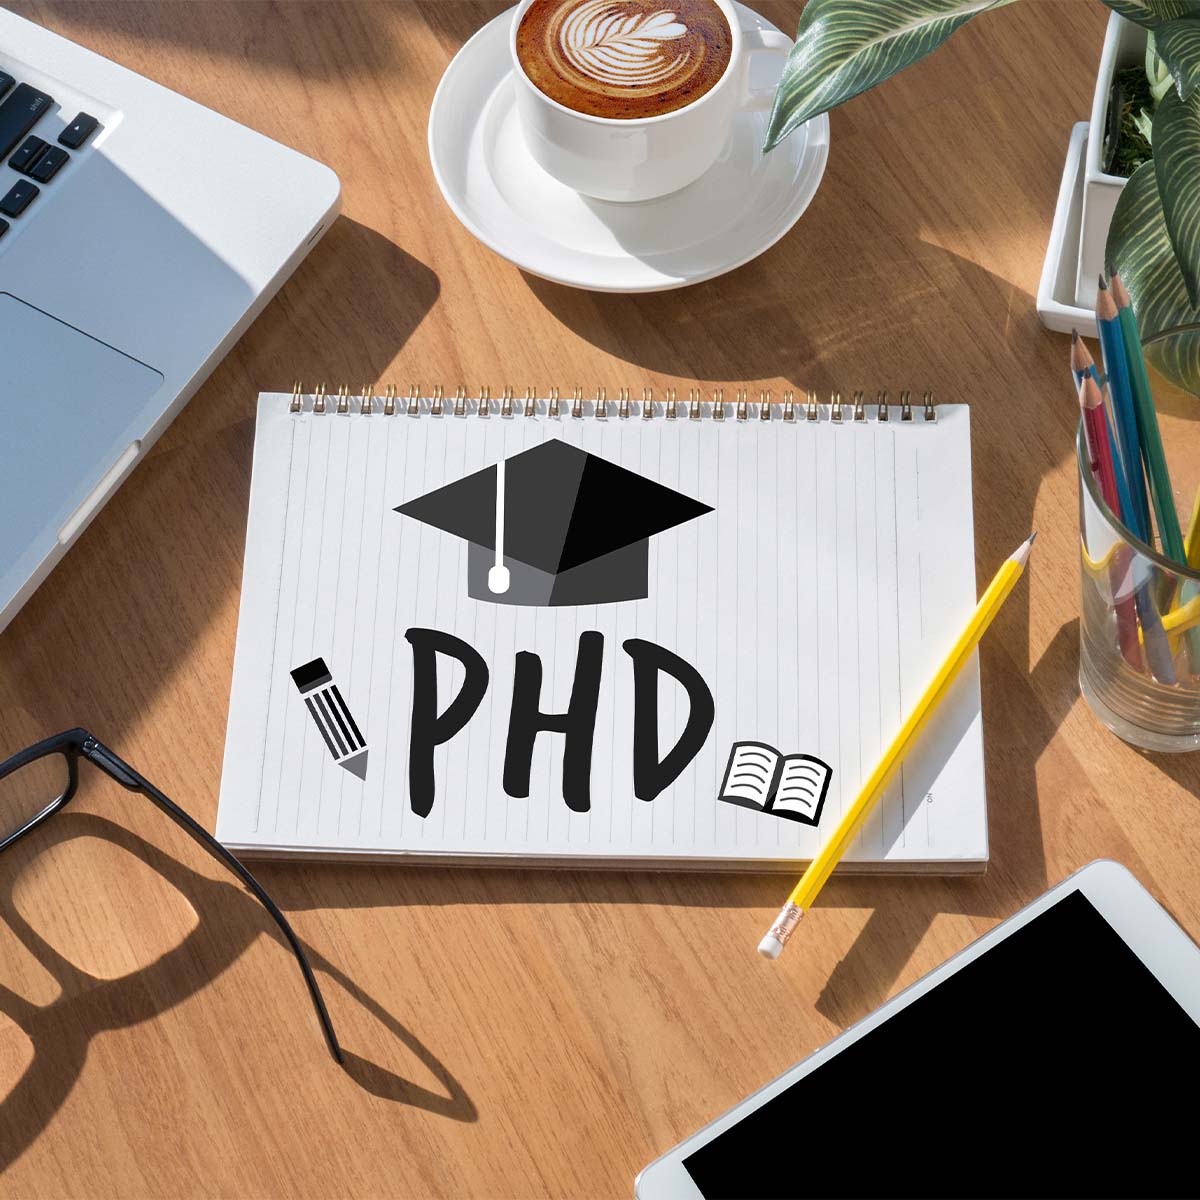 phd management in germany